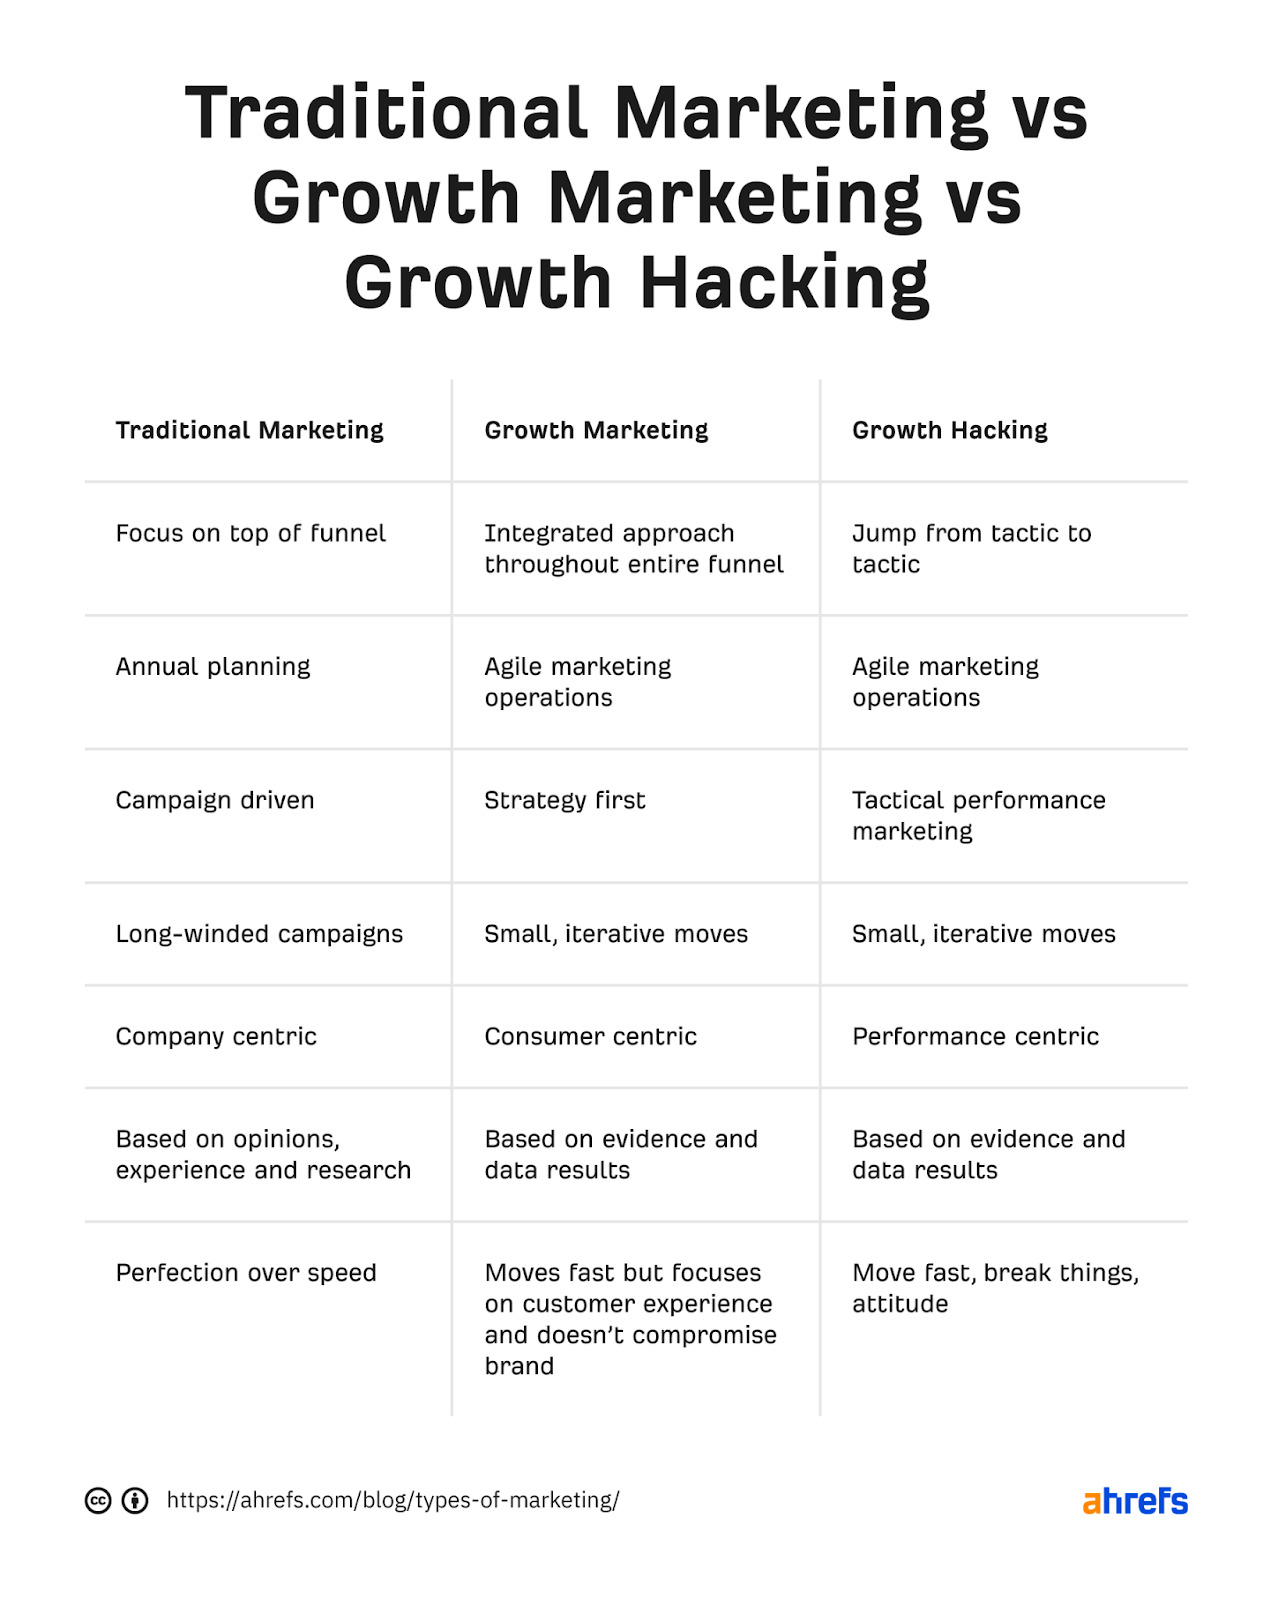 Table comparing 3 marketing types